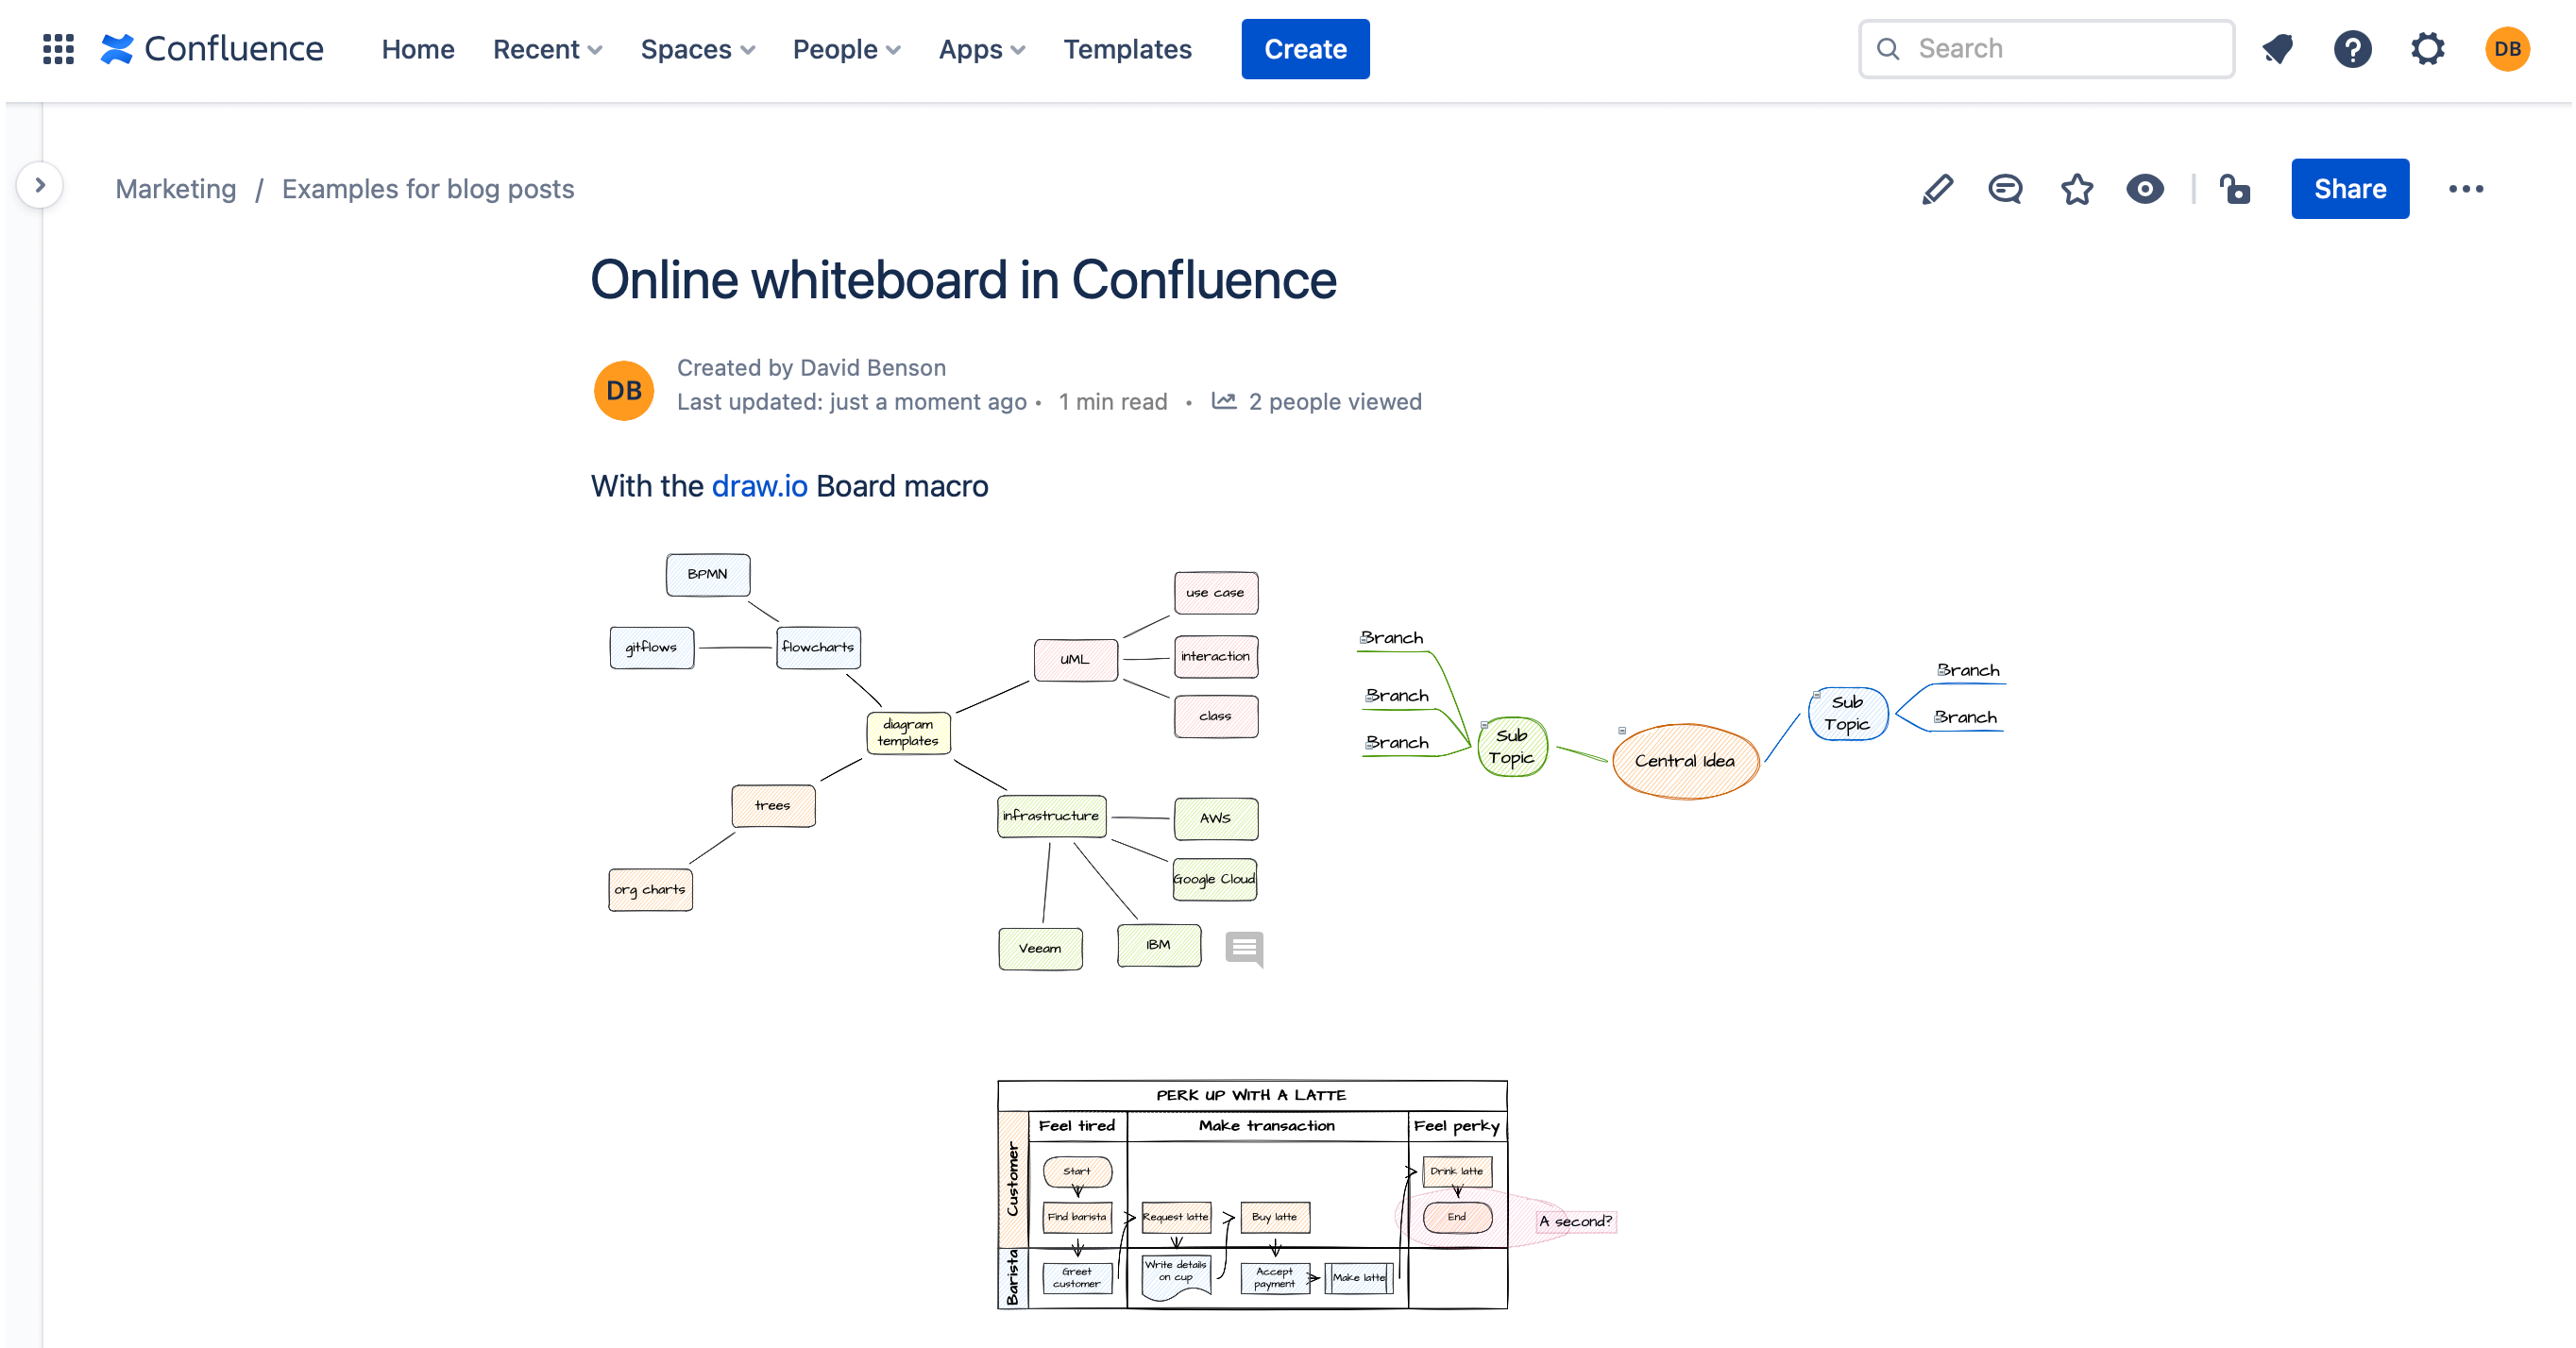 With the draw.io Sketch macro, you have a fully featured online whiteboard inside Confluence Cloud